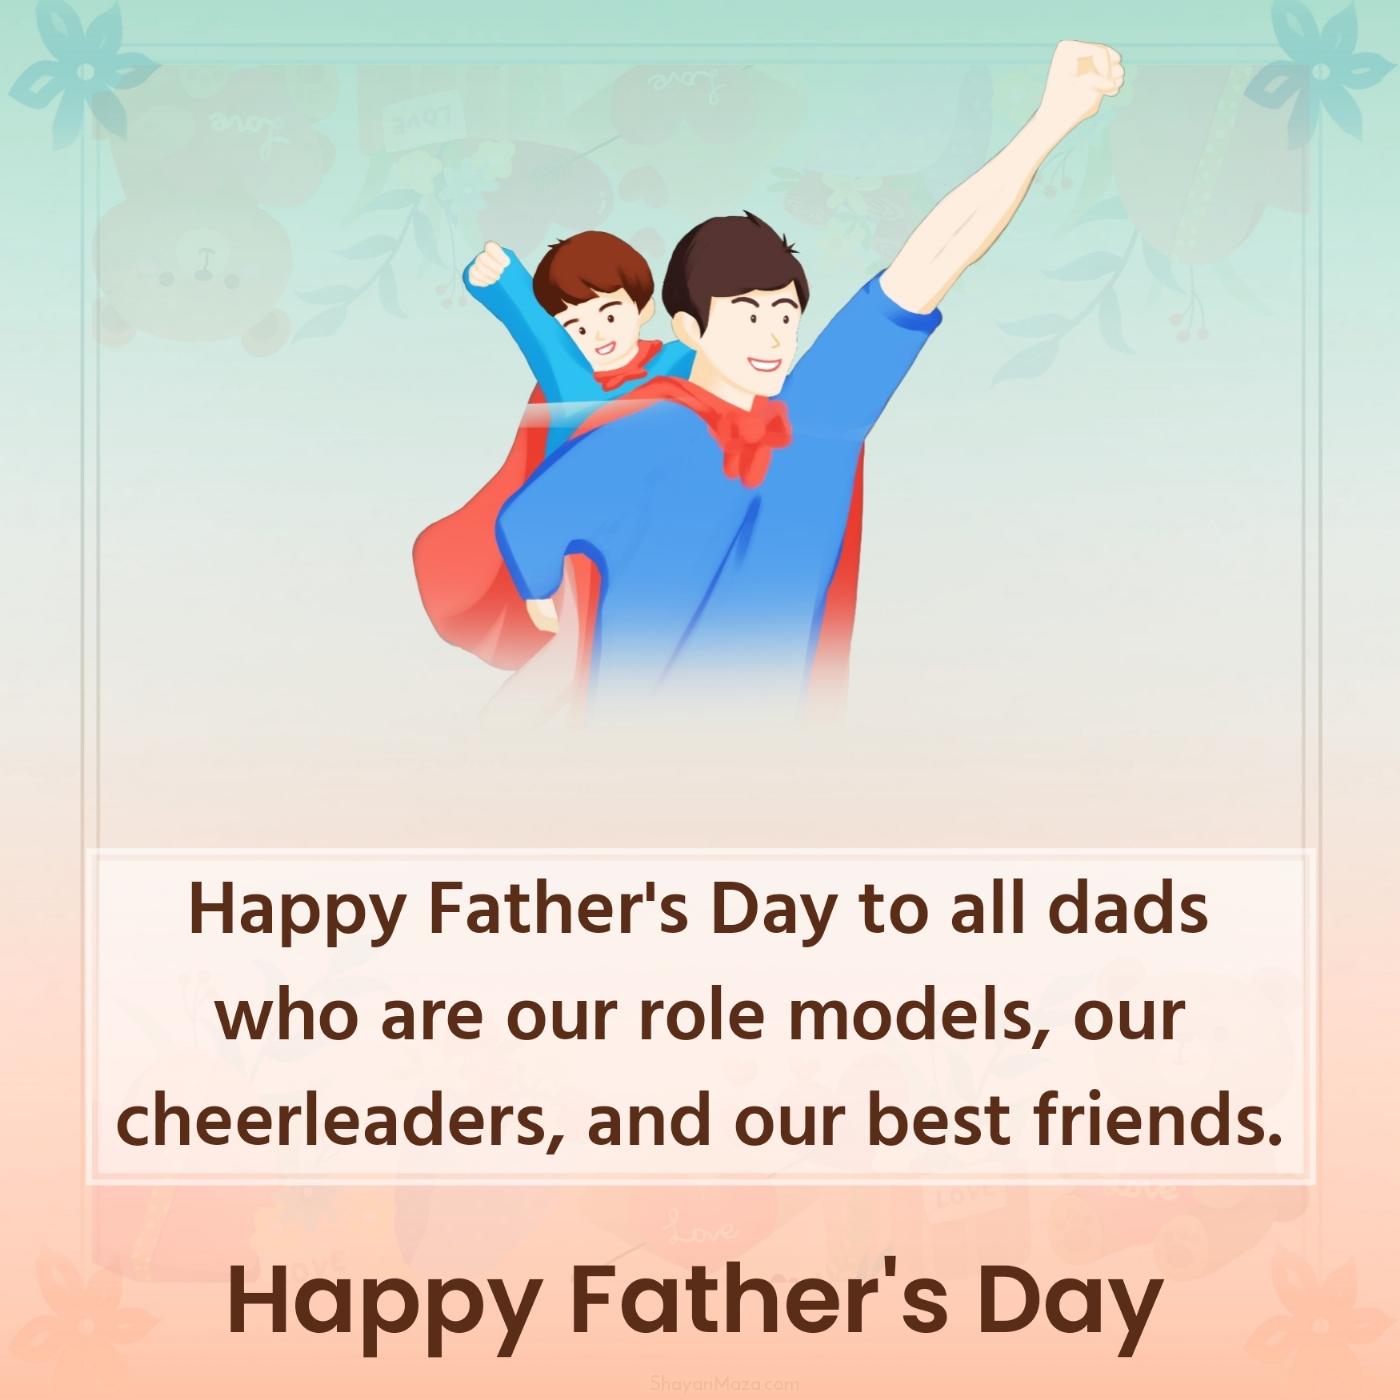 Happy Father's Day to all dads who are our role models